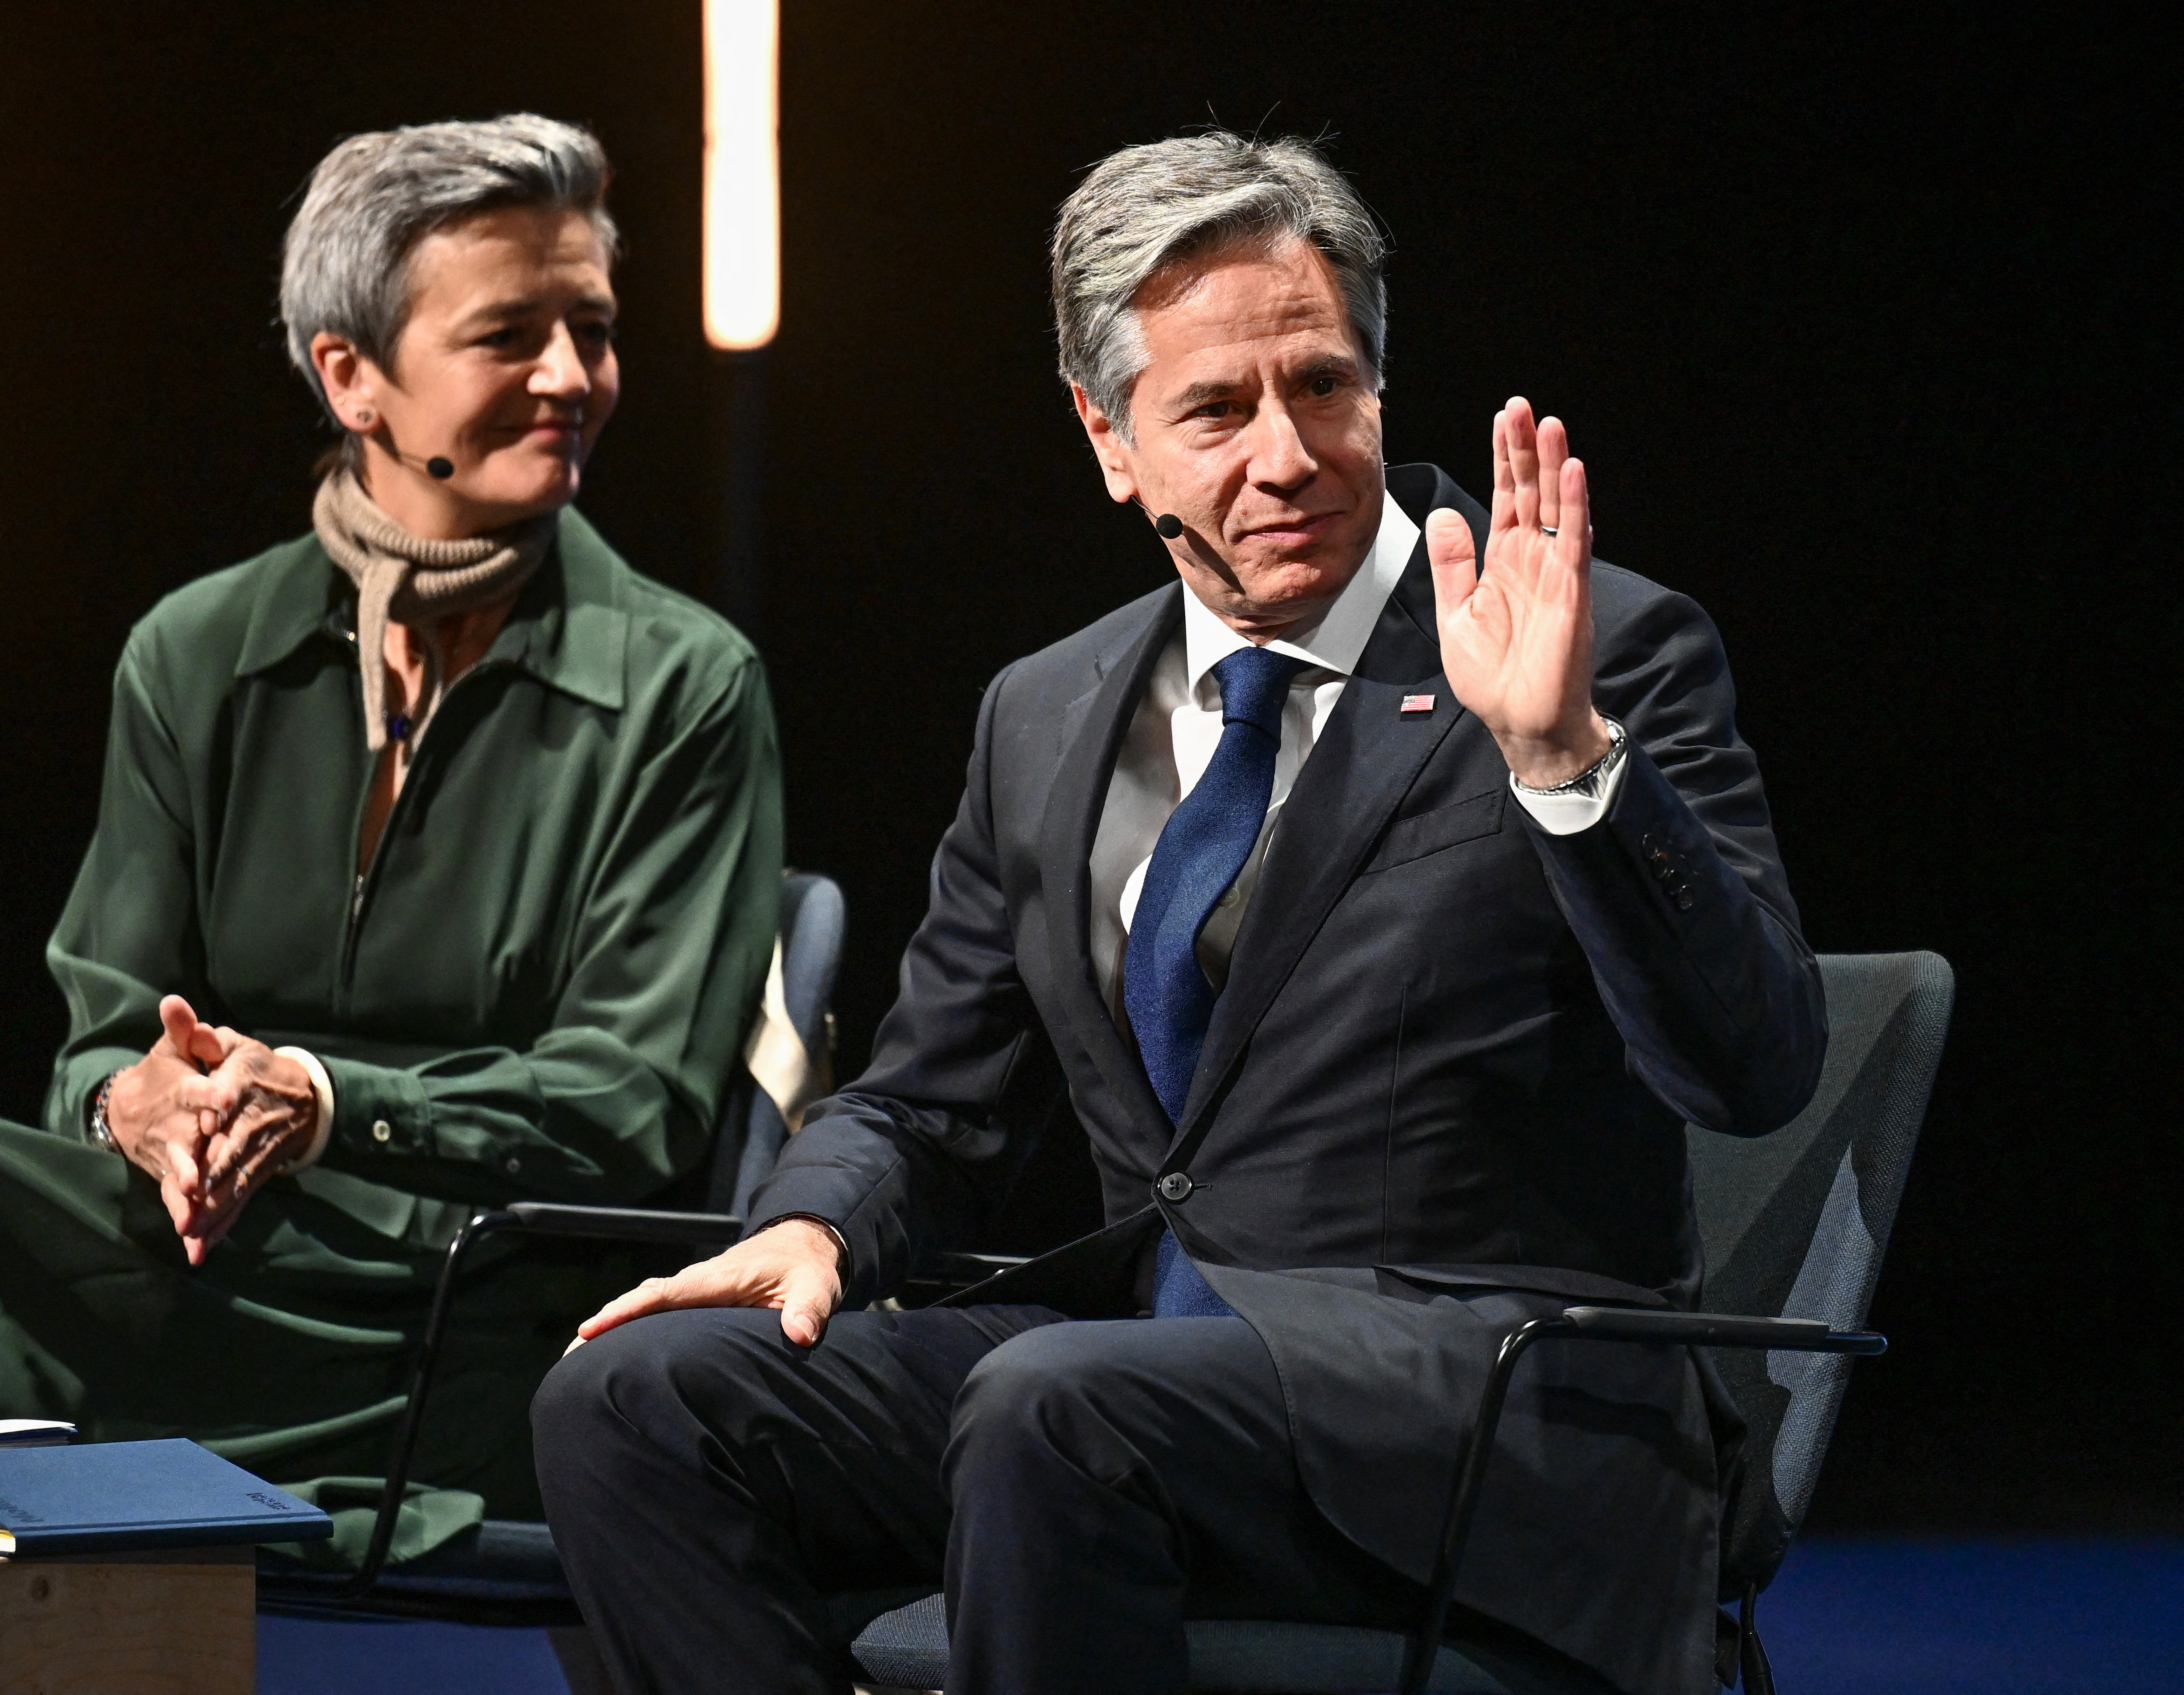 U.S. Secretary of State Blinken and European Commission Vice President Vestager attend a meeting, in Lulea